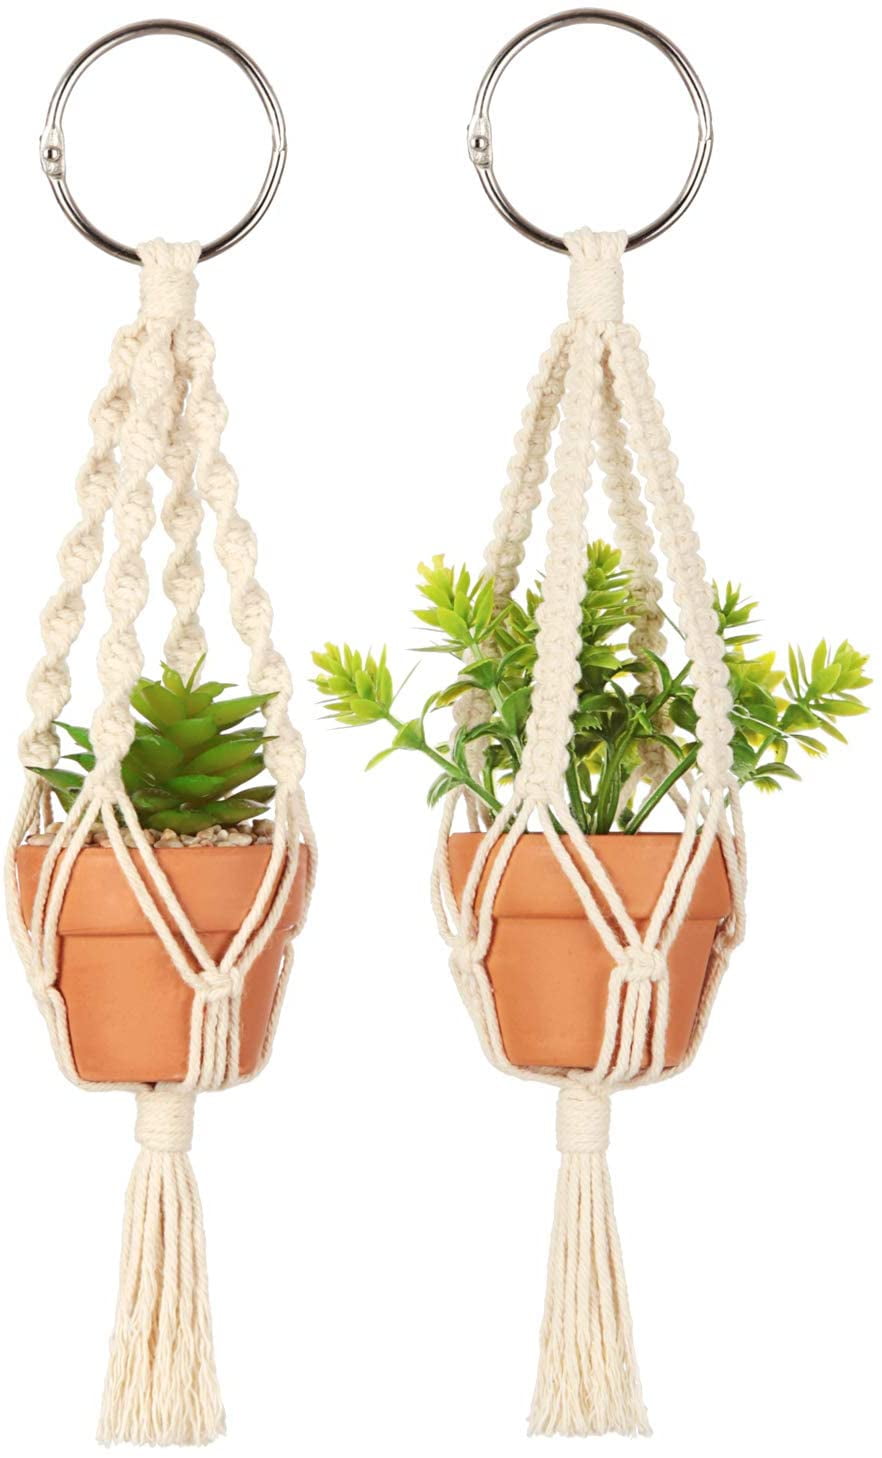 CooShou 2 Pack Mini Macrame Plant Hanger Car Rear View Mirror Charm Hanging Accessories Car Office Home Wall Hallway Plant Hangers with Artificial Succulent Plants and Pots for Plant Lover